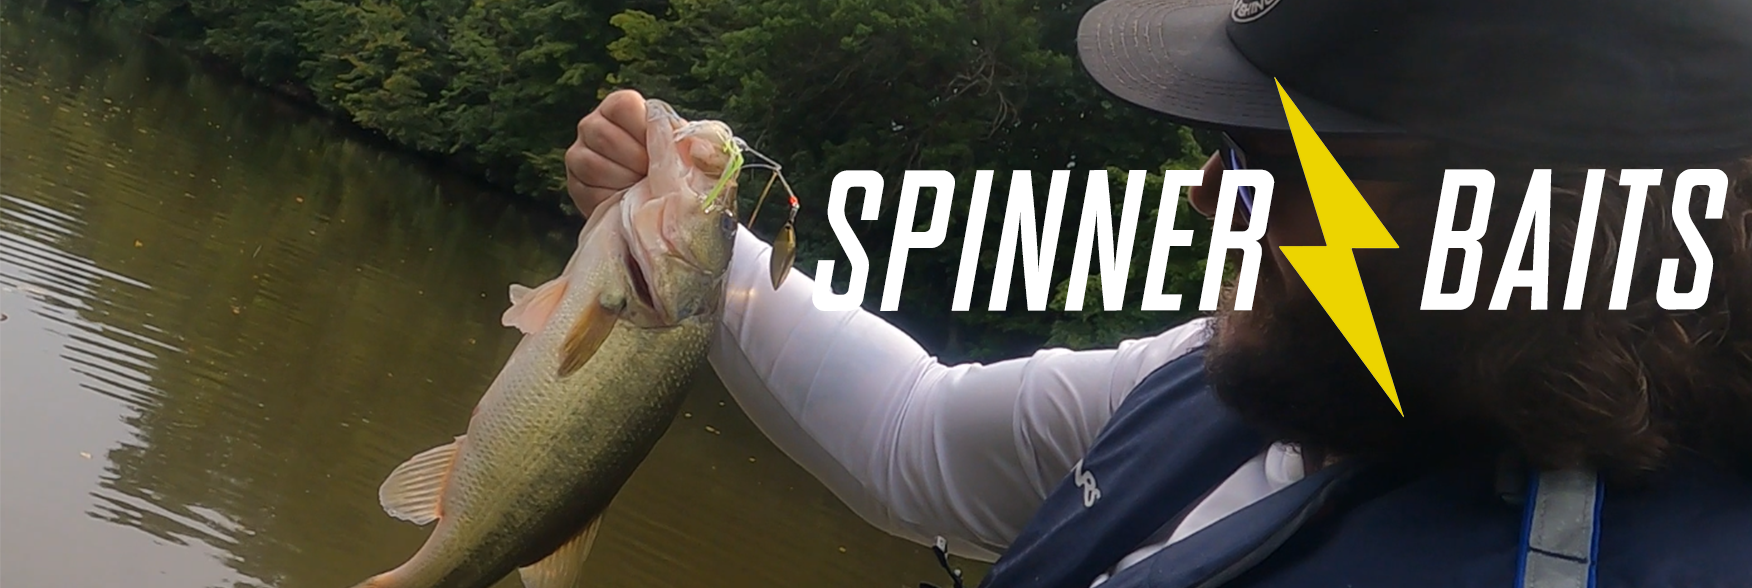 https://cdn.shopify.com/s/files/1/0666/7652/3262/collections/Spinnerbaits2.png?v=1703054046